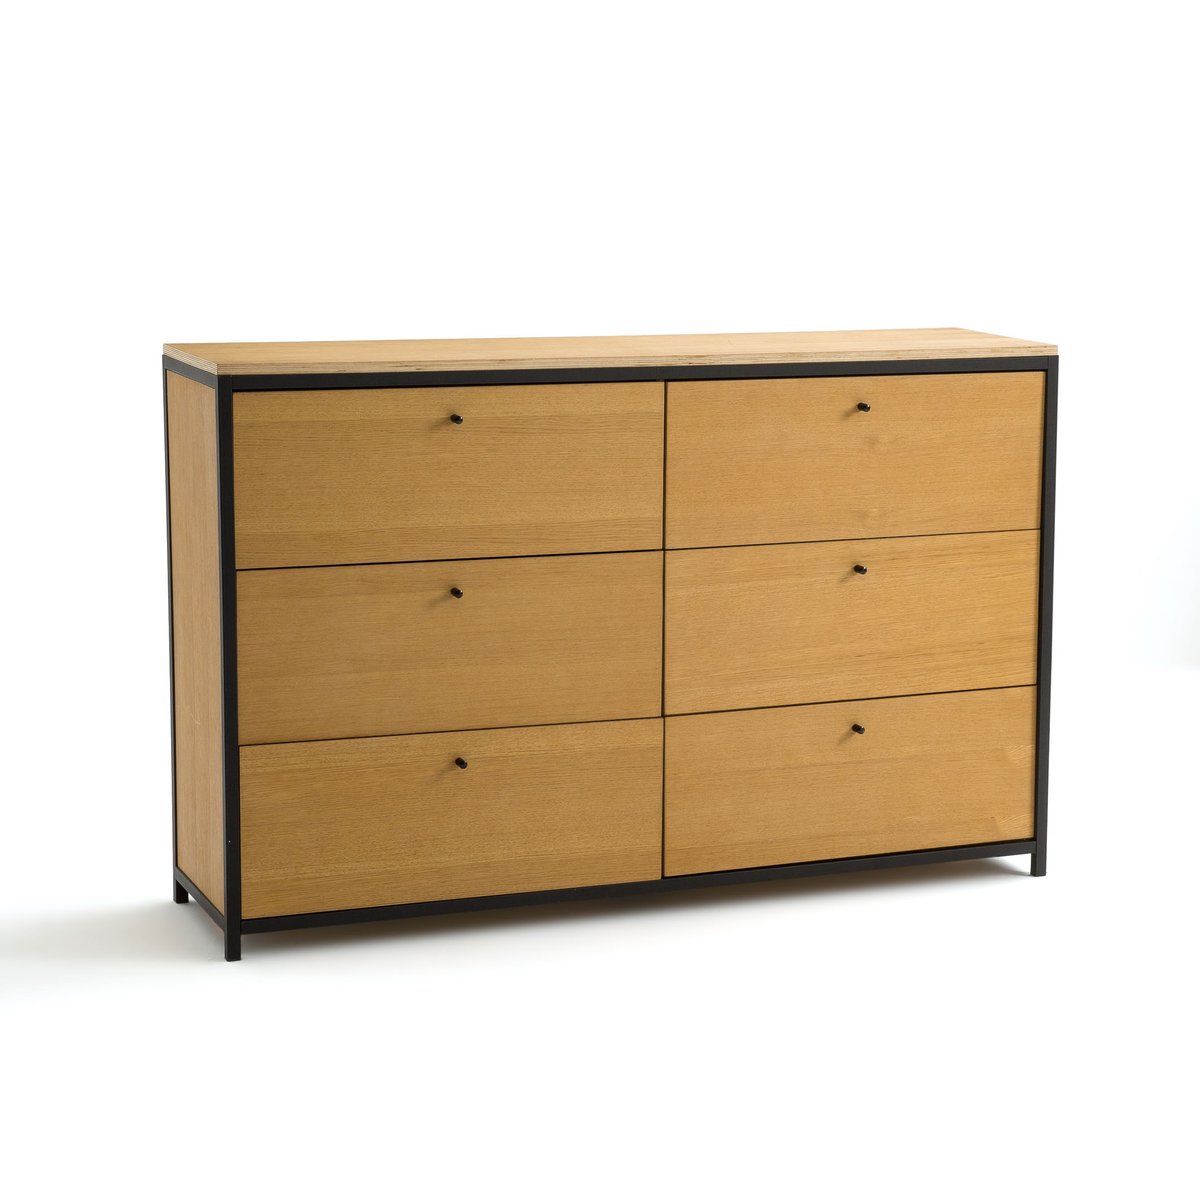 Image of Talist 6 Drawer Chest